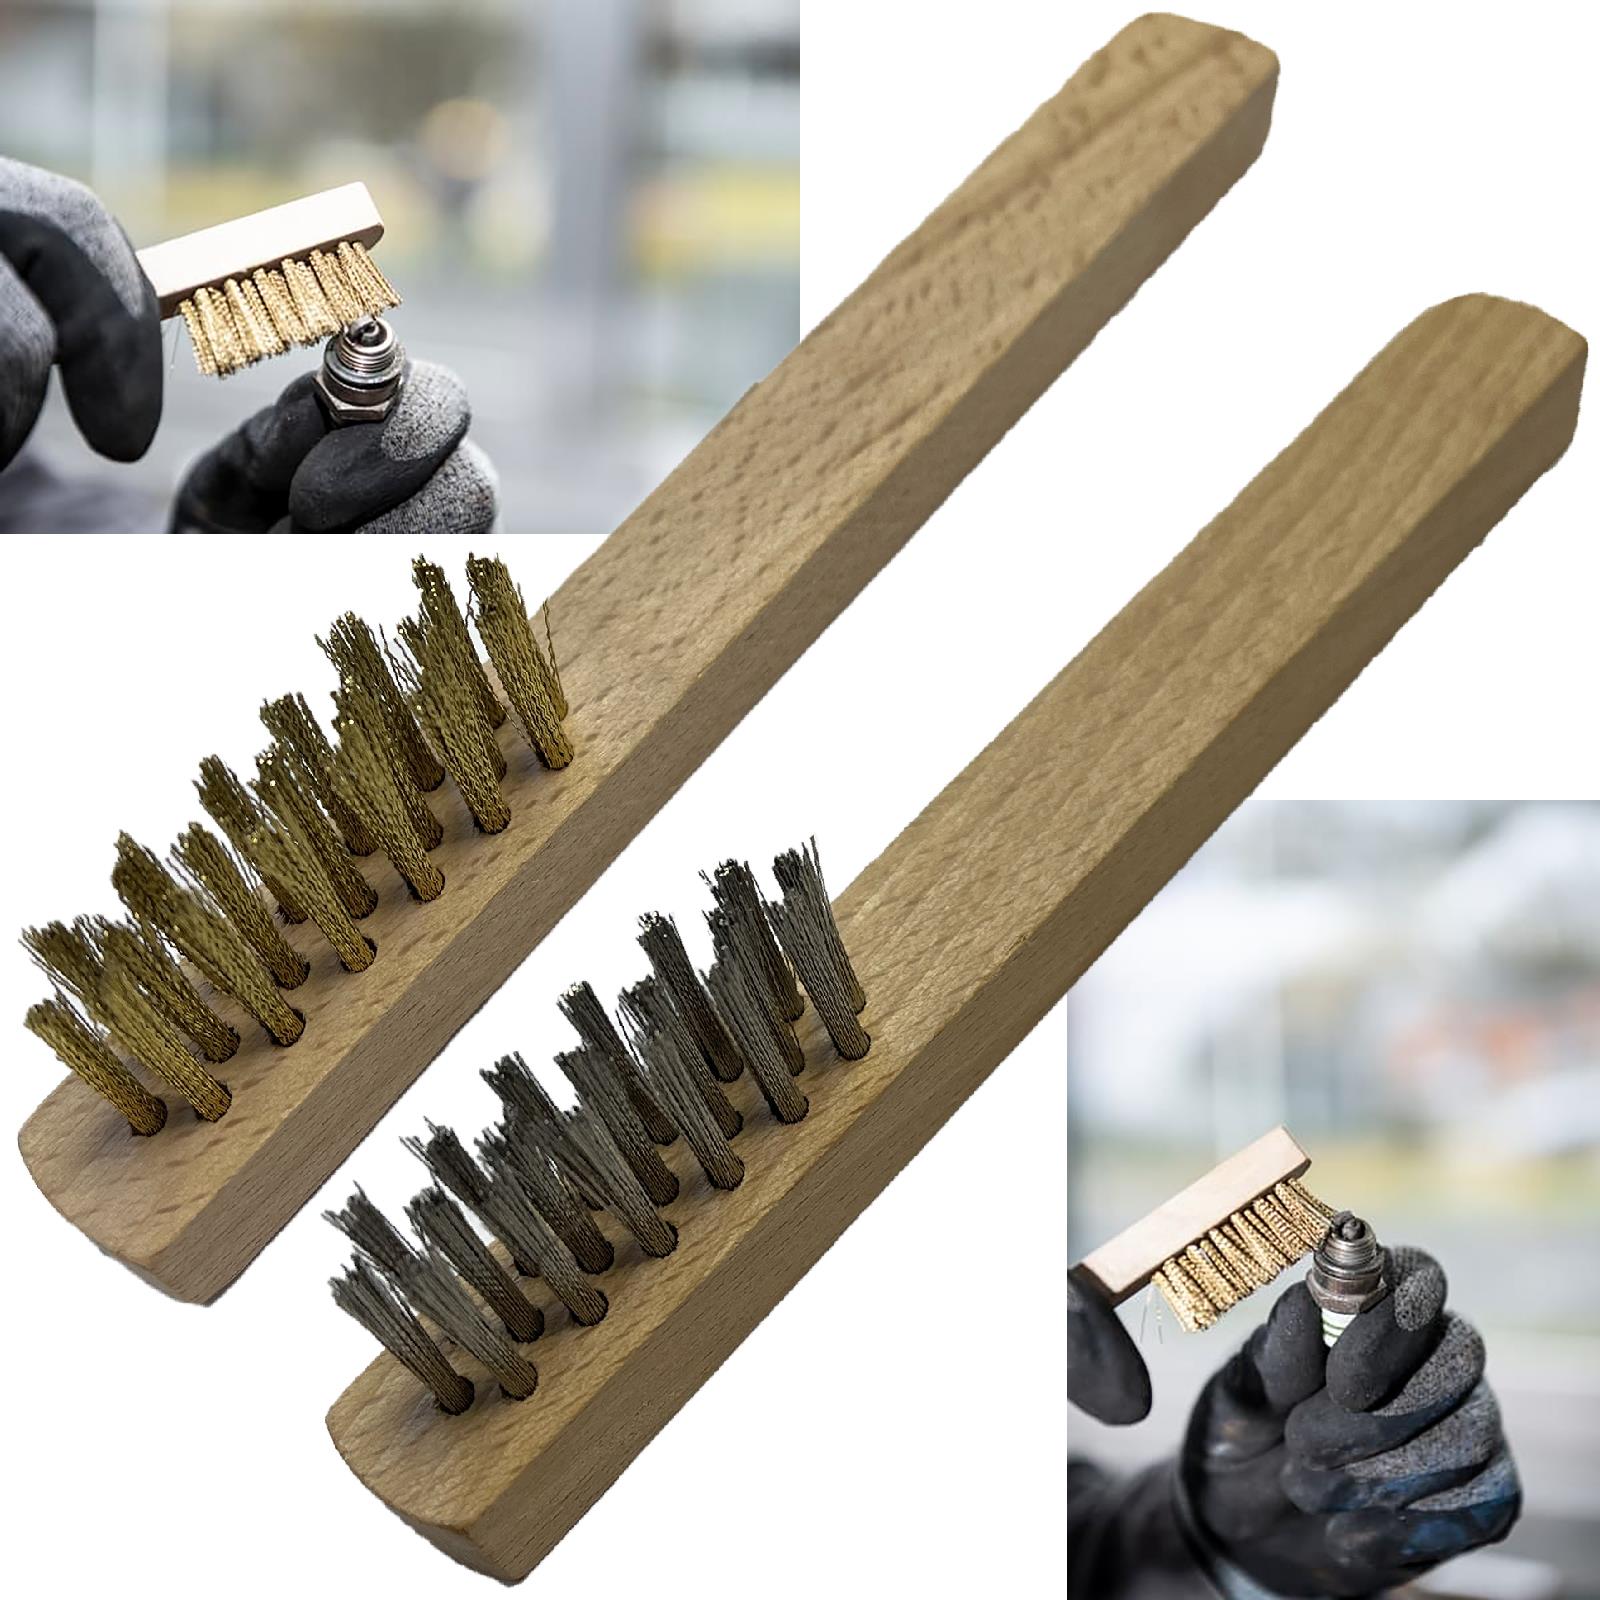 2.5 Nyalox Cup Brush For Drill — Wane+Flitch